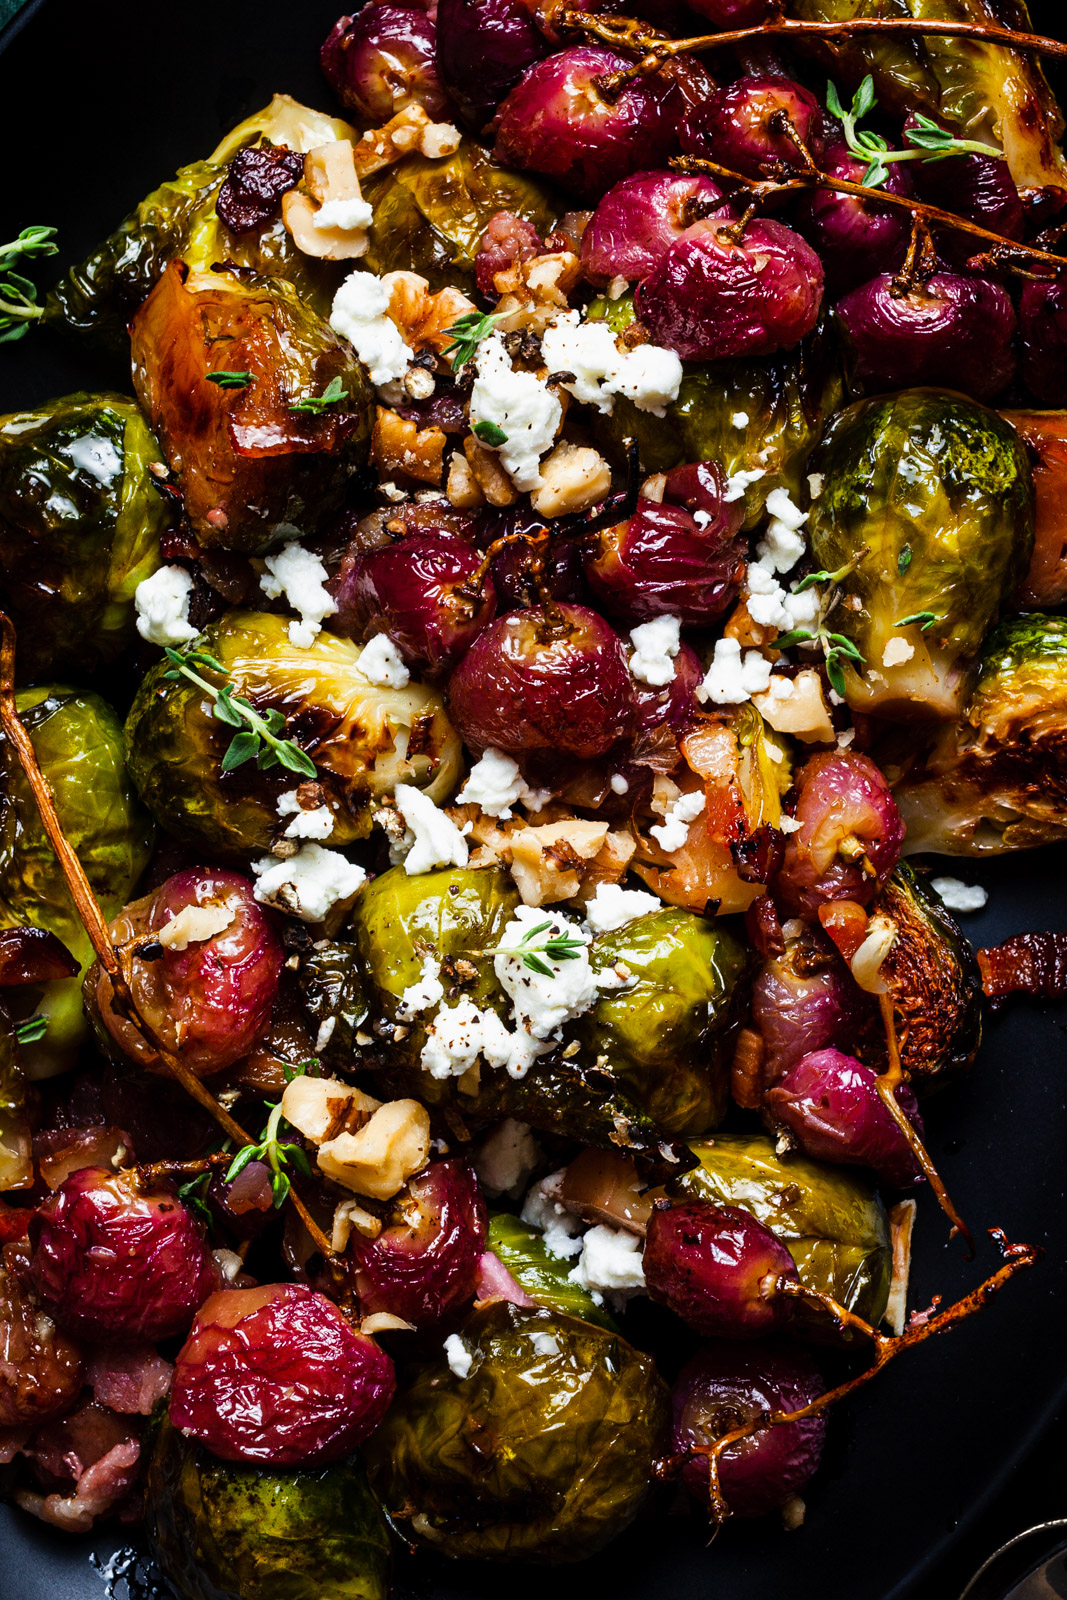 Roasted Brussel Sprouts and Grapes With Bacon